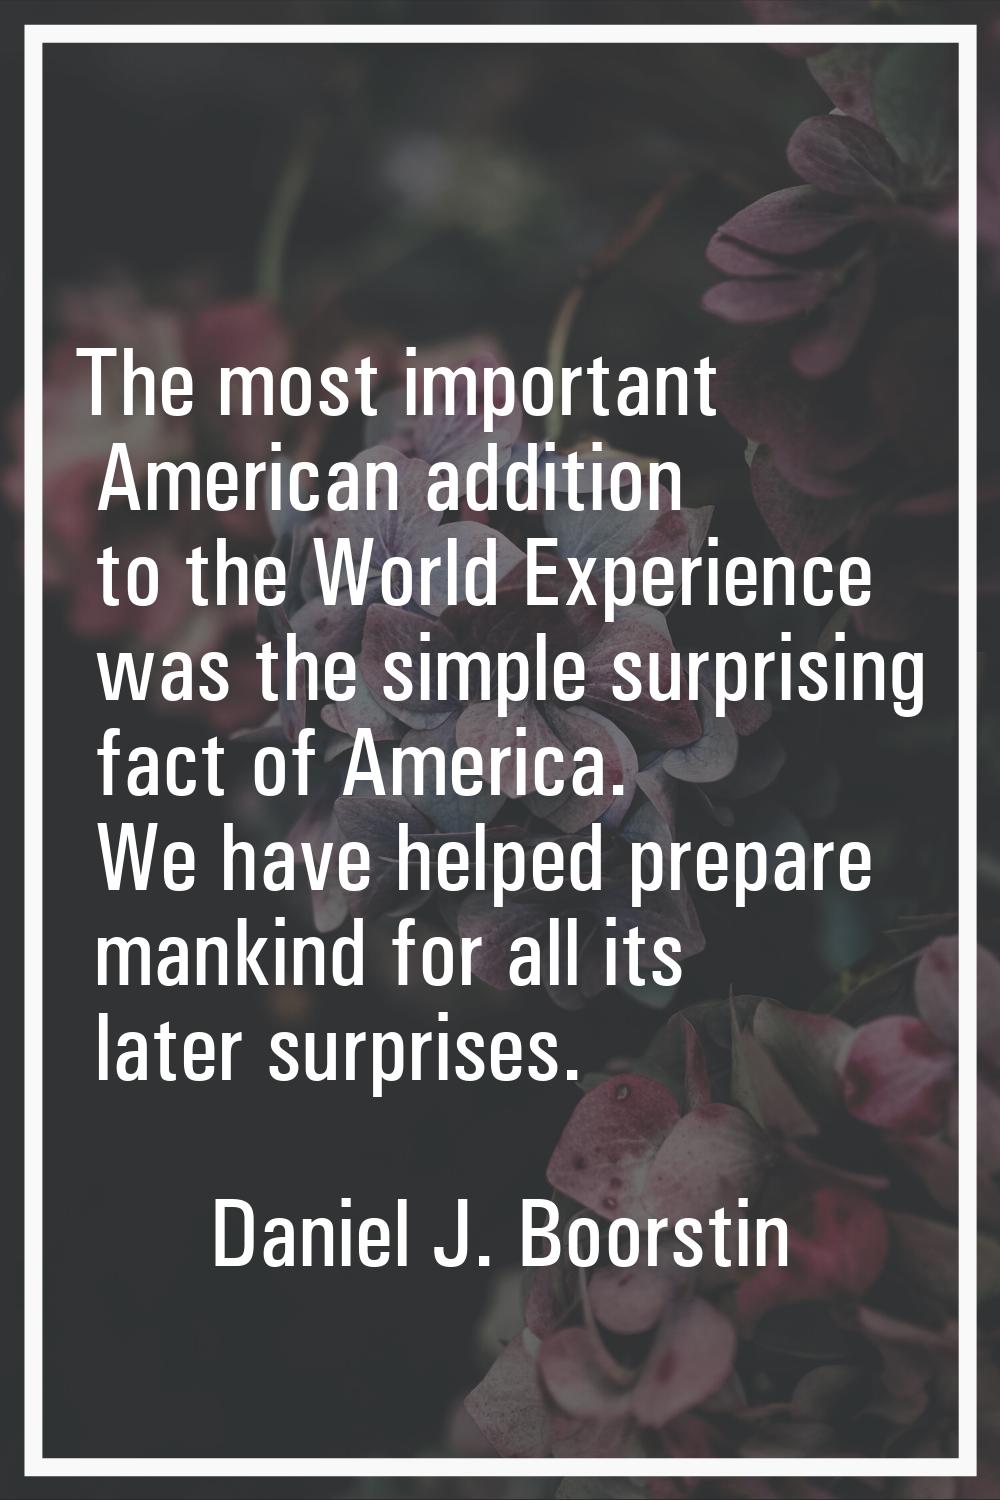 The most important American addition to the World Experience was the simple surprising fact of Amer